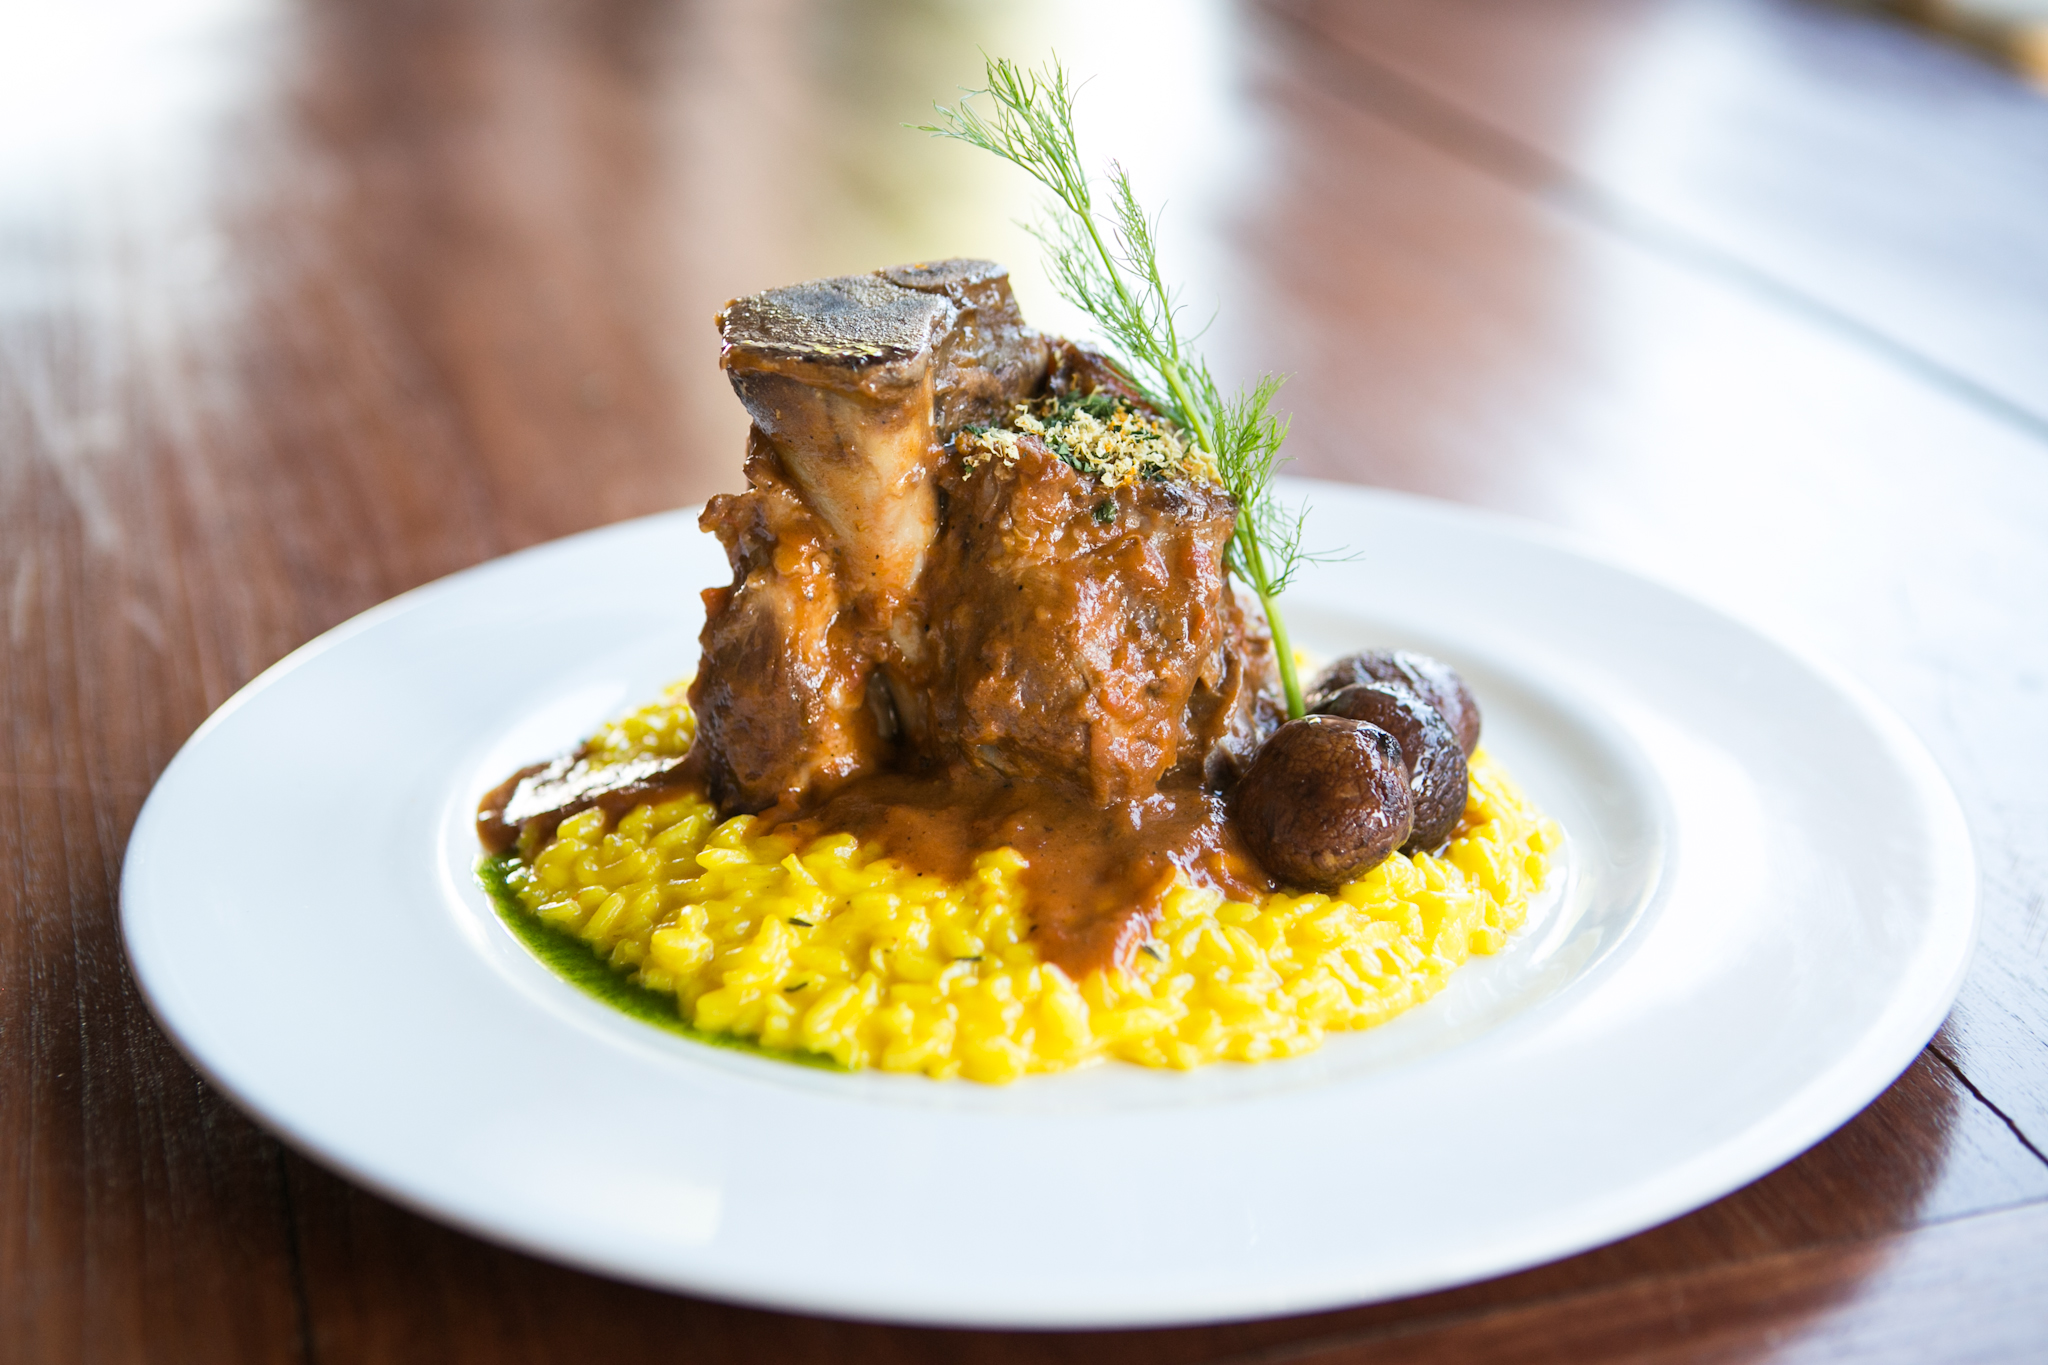 <a id="Solare-Ossobuco-Cooking-Class"></a>Cooking Class: Ossobuco and Risotto <span style="color: black;">- Sold Out</span>